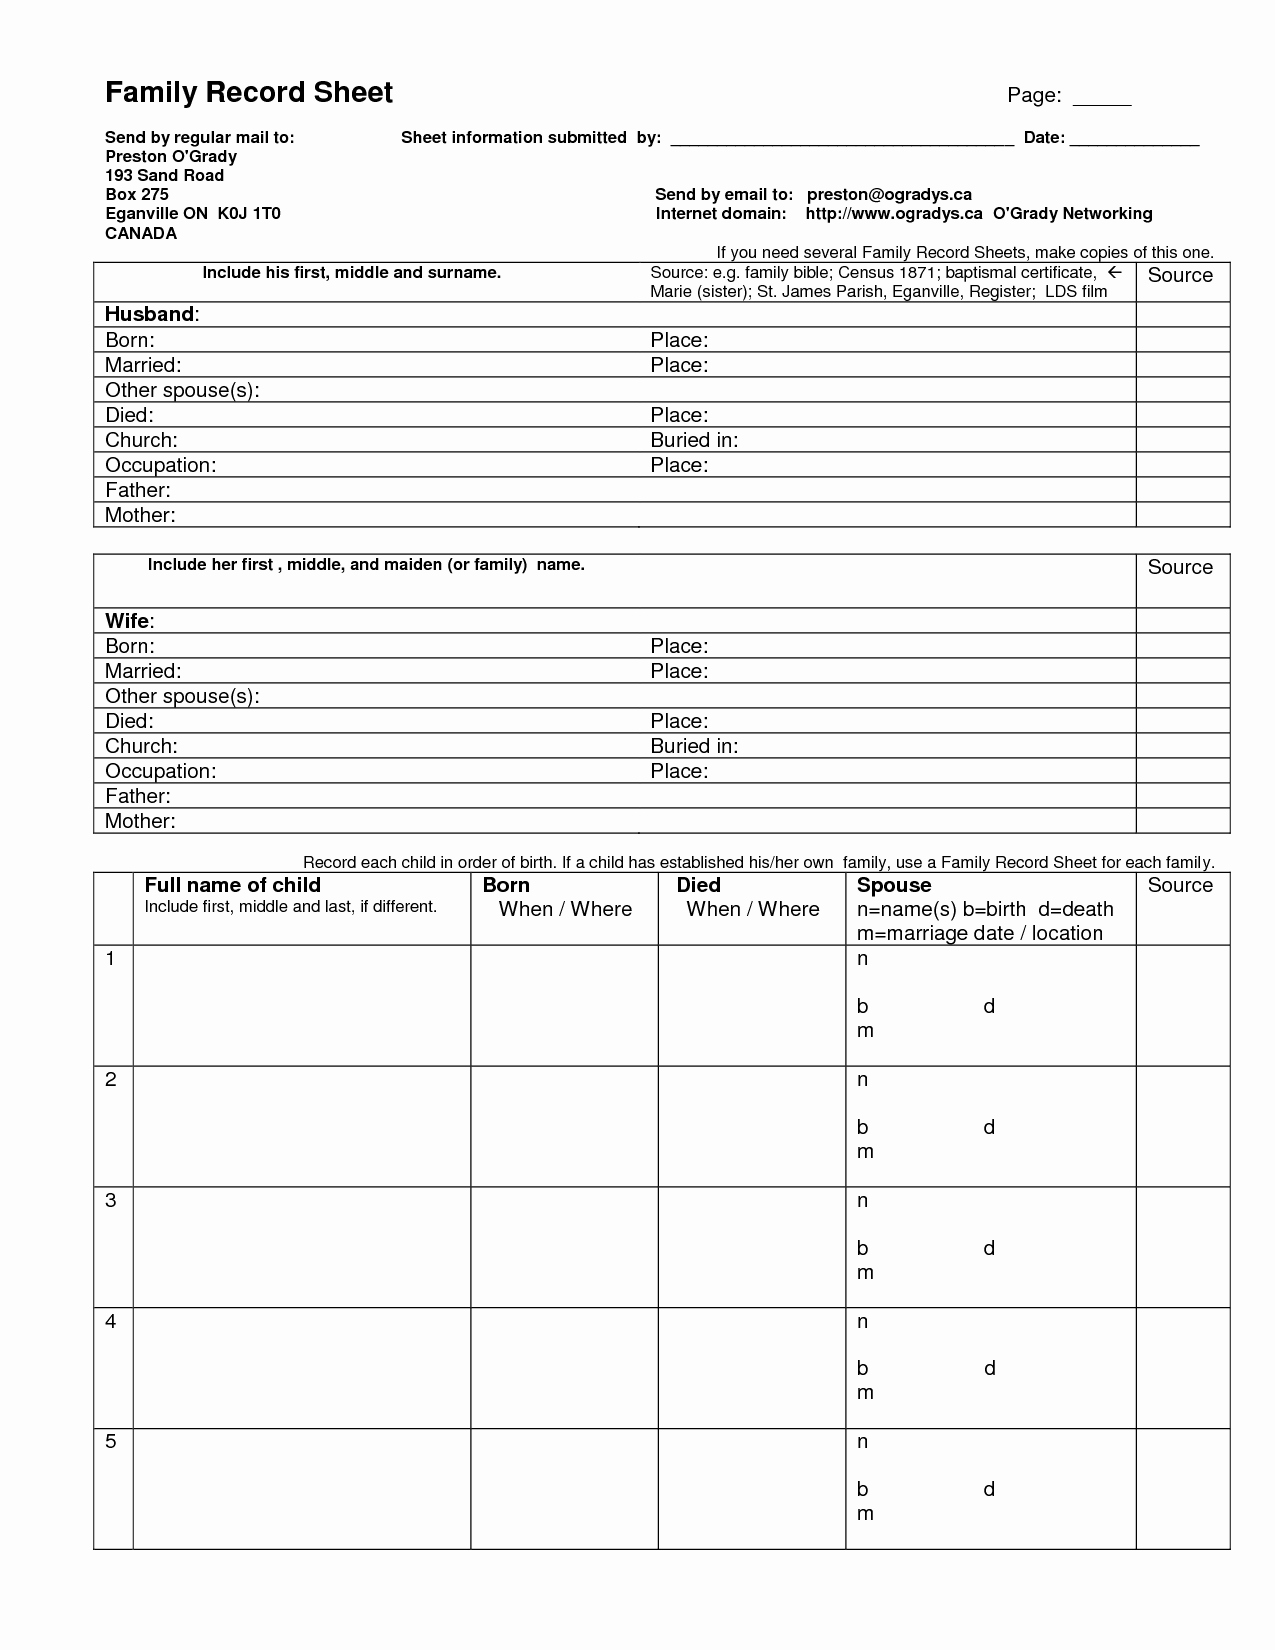 Family Group Sheet Template Beautiful Family Record Sheet Doc Genealogy forms